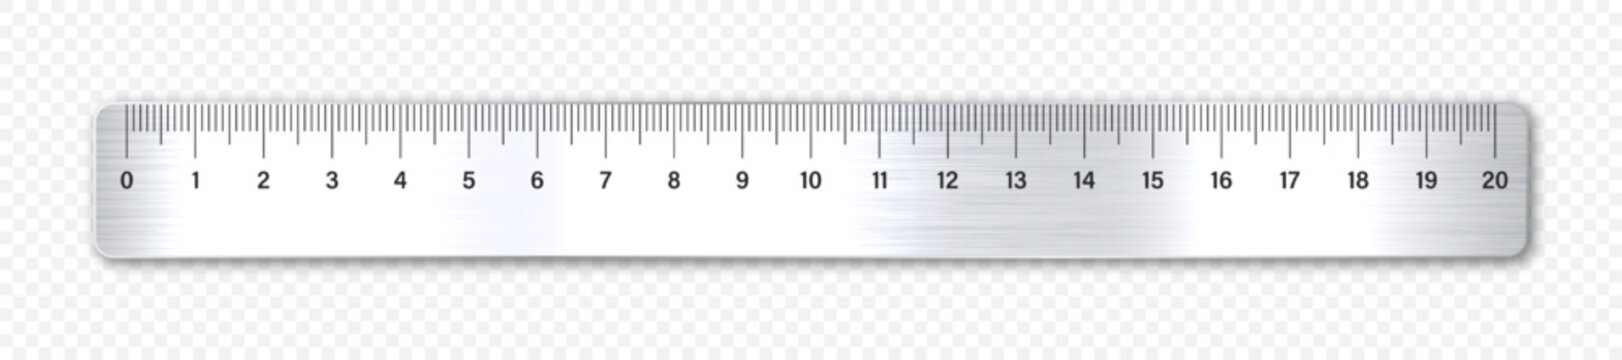 Realistic Metal Ruler of 30 Centimeters and a Metal Ruler of 12